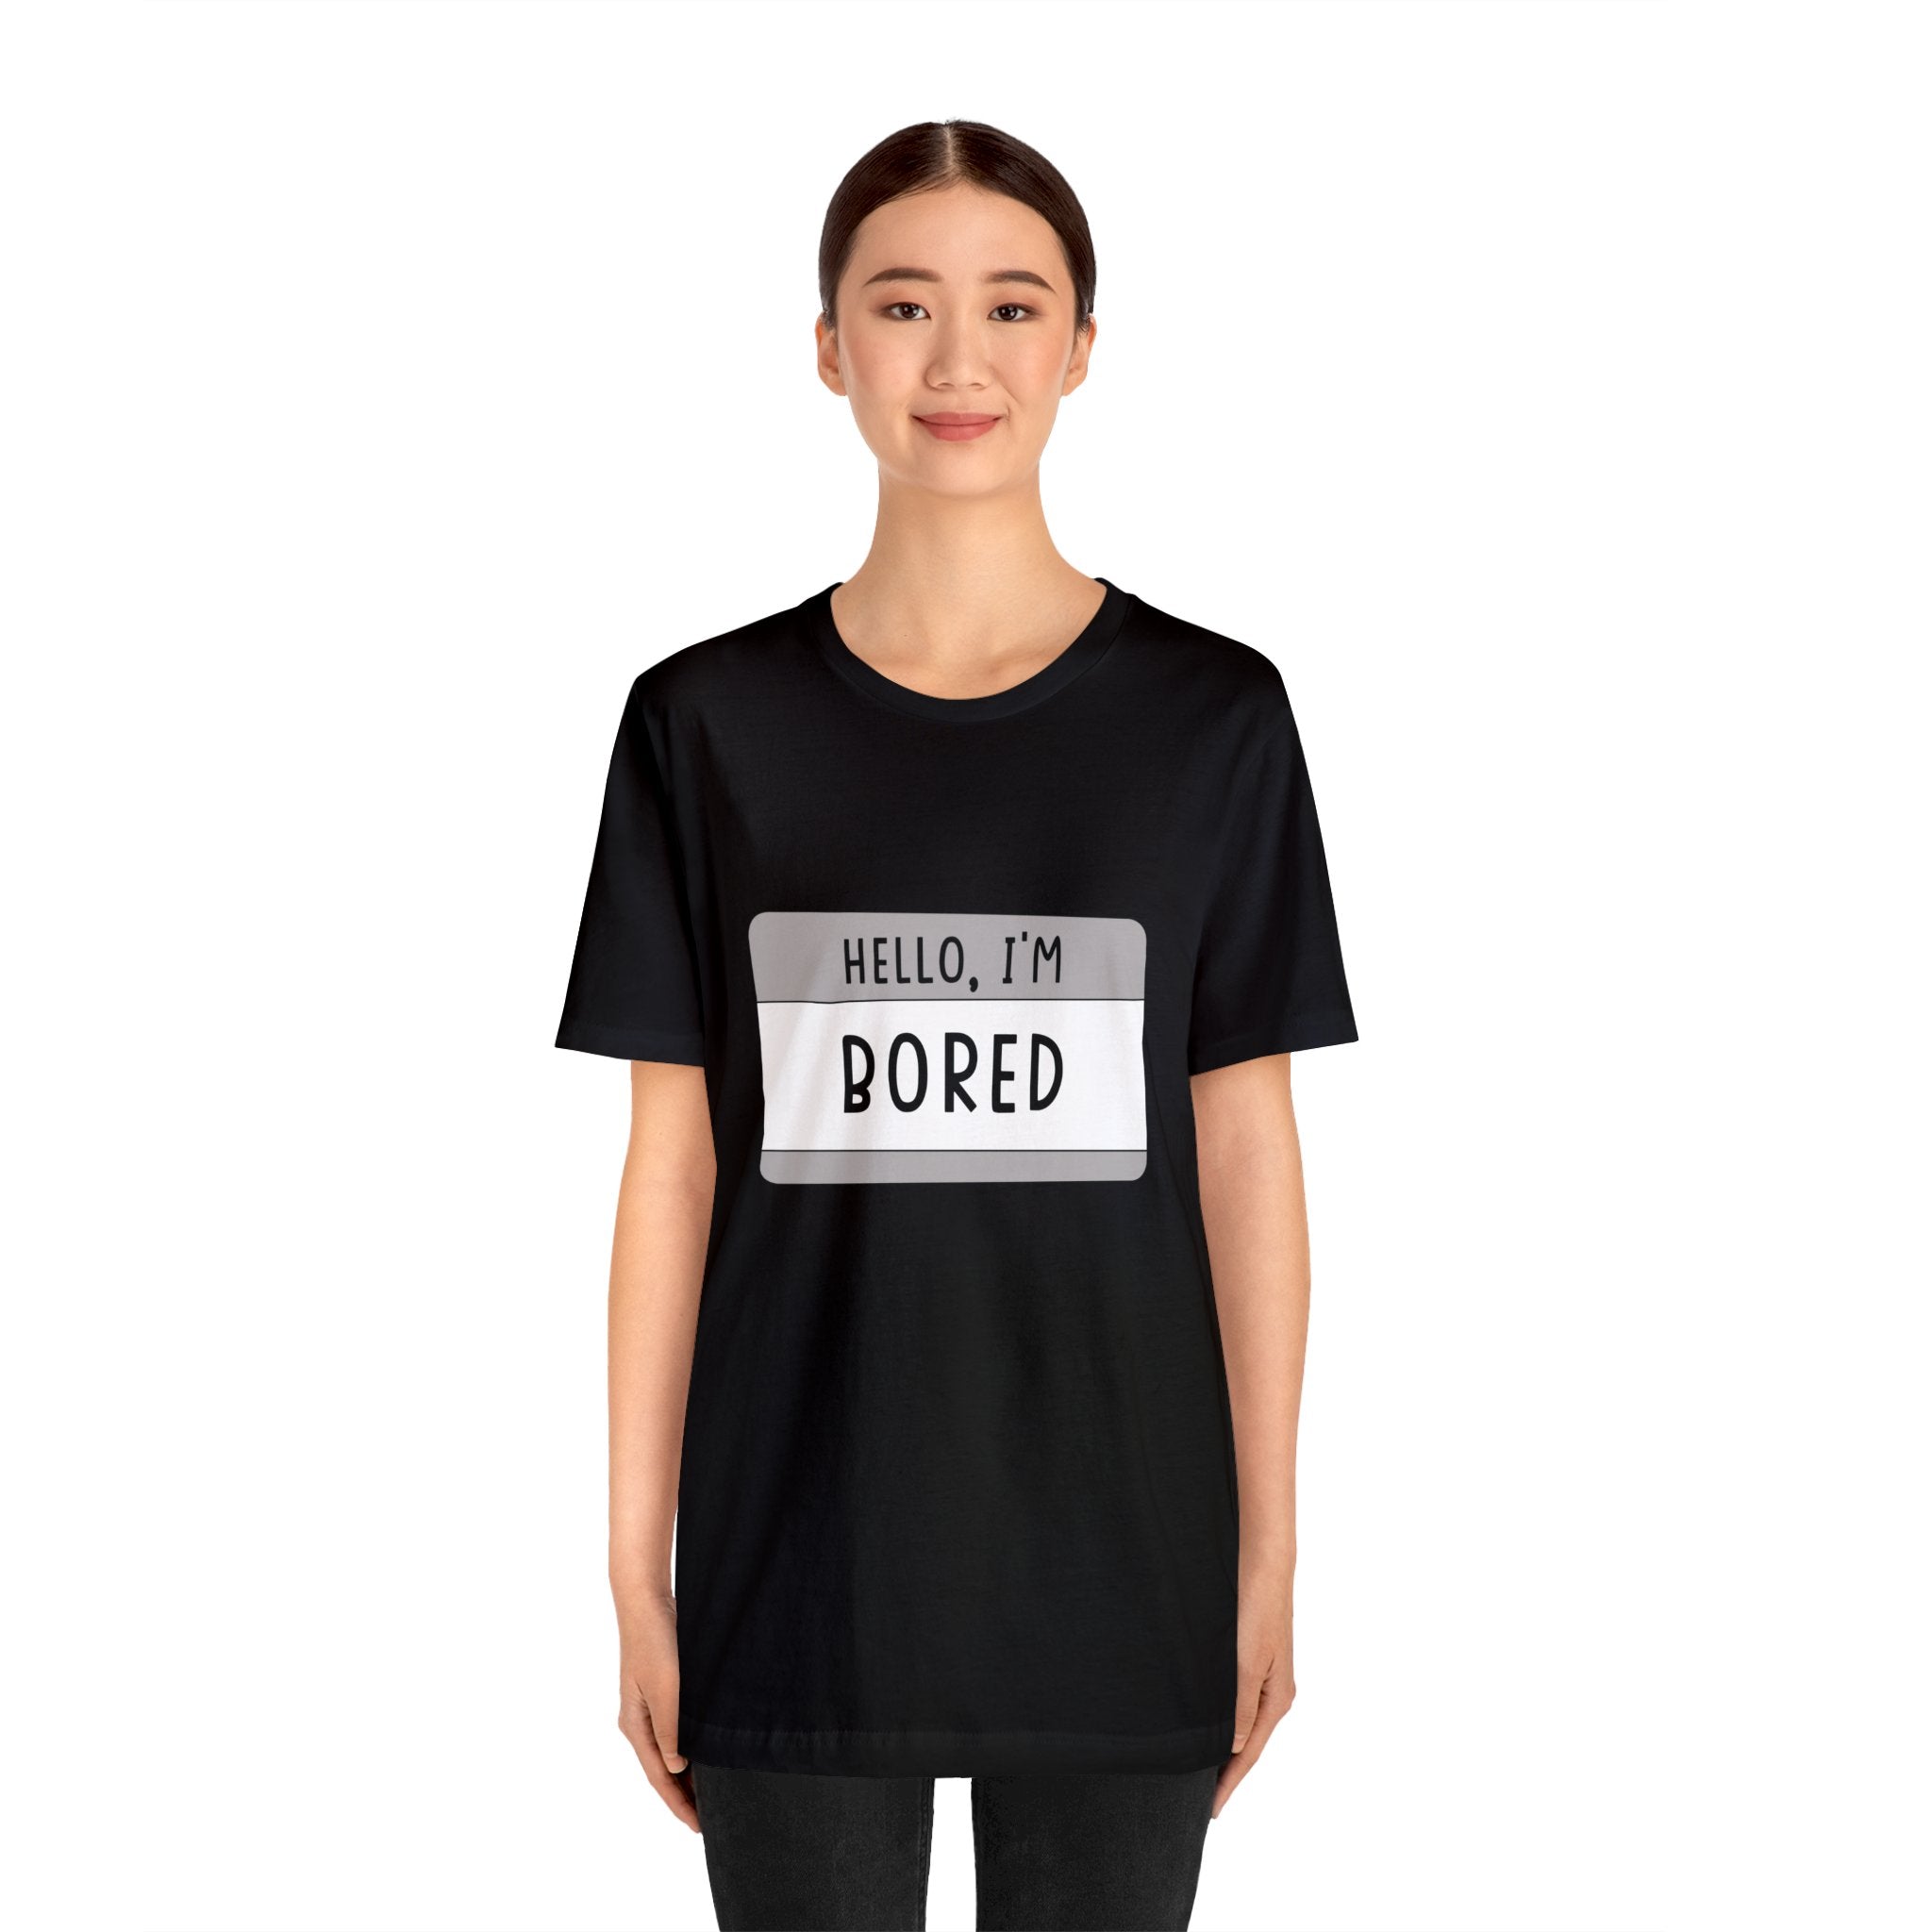 A woman in a black tee-shirt that says "Hello, I'm Board" captures the essence of her laid-back attitude.